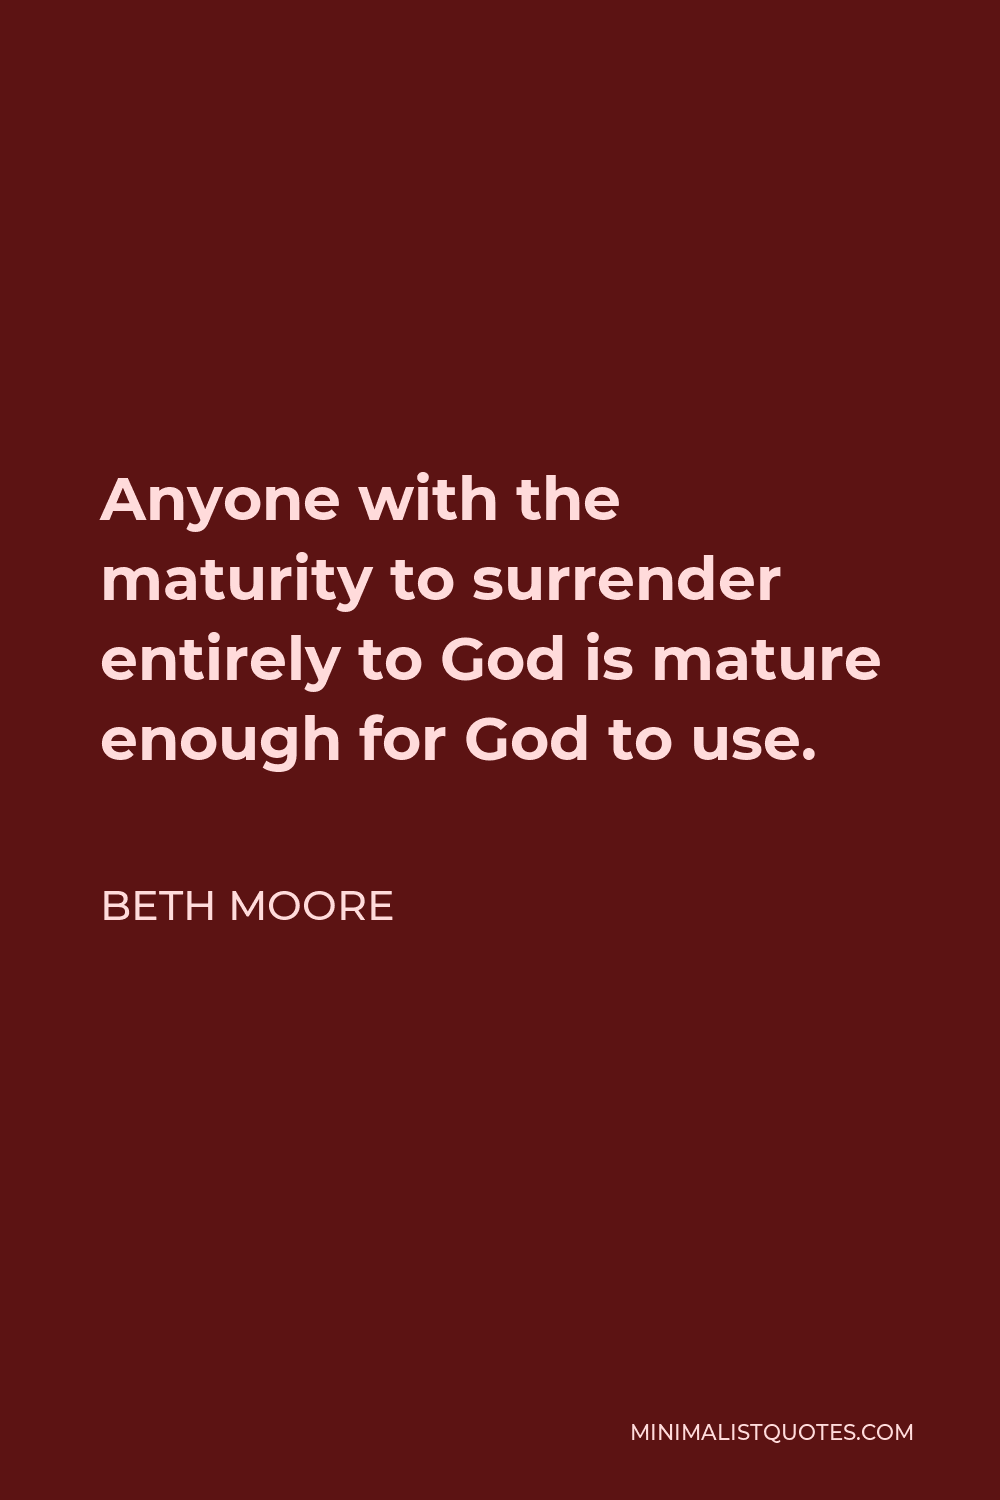 Beth Moore Quote - Anyone with the maturity to surrender entirely to God is mature enough for God to use.